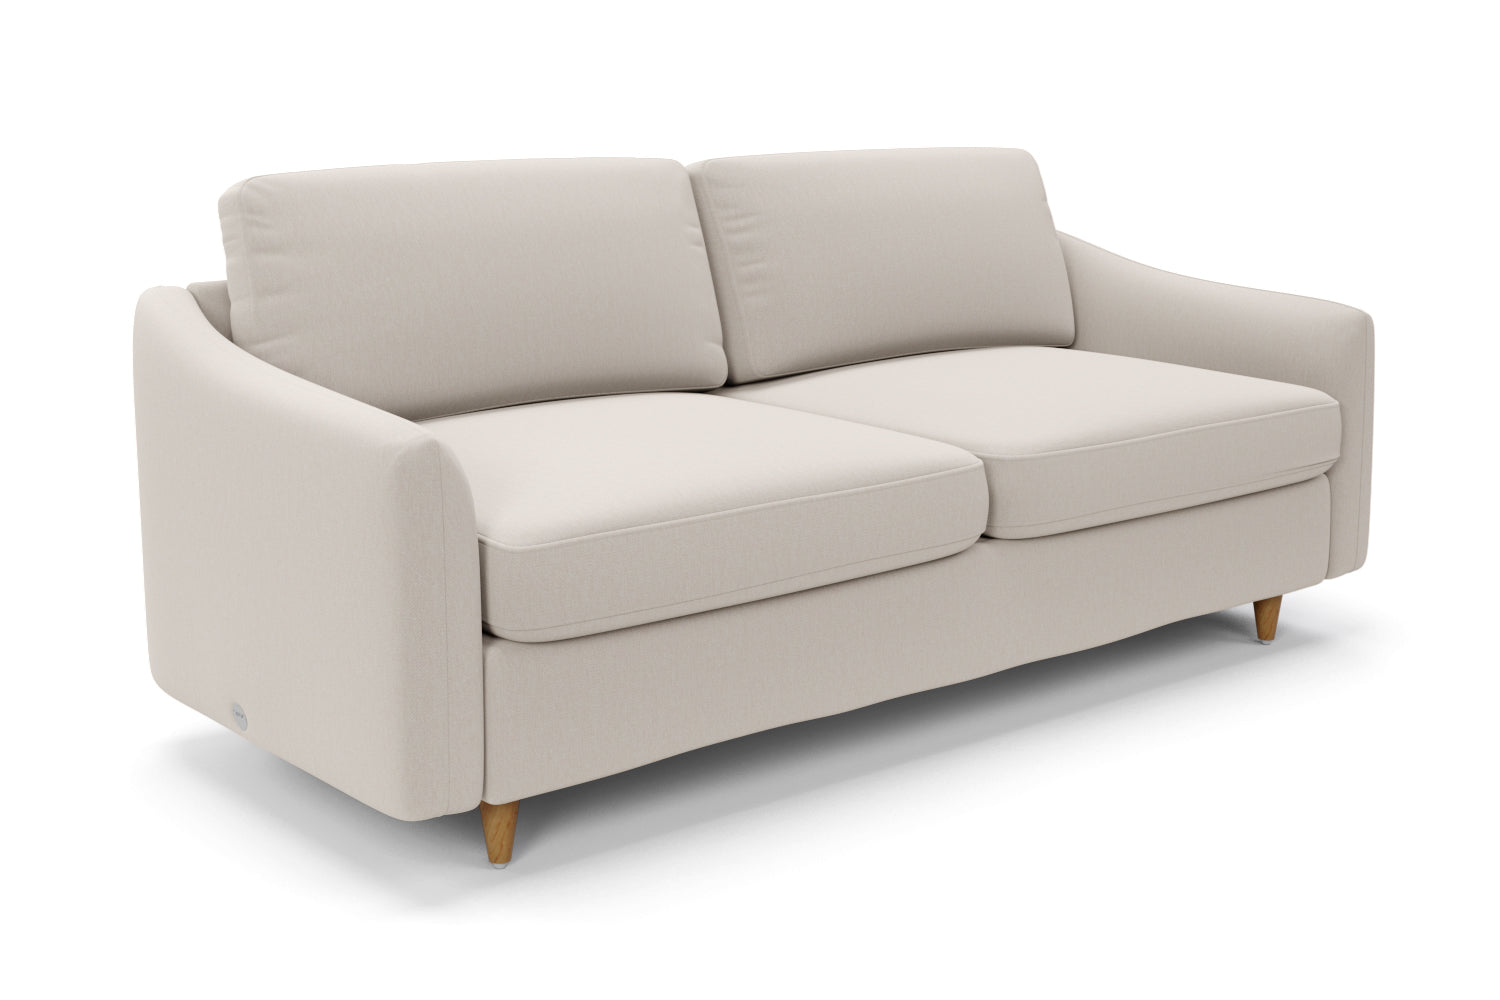 SNUG | The Rebel 3 Seater Sofa Bed in Biscuit